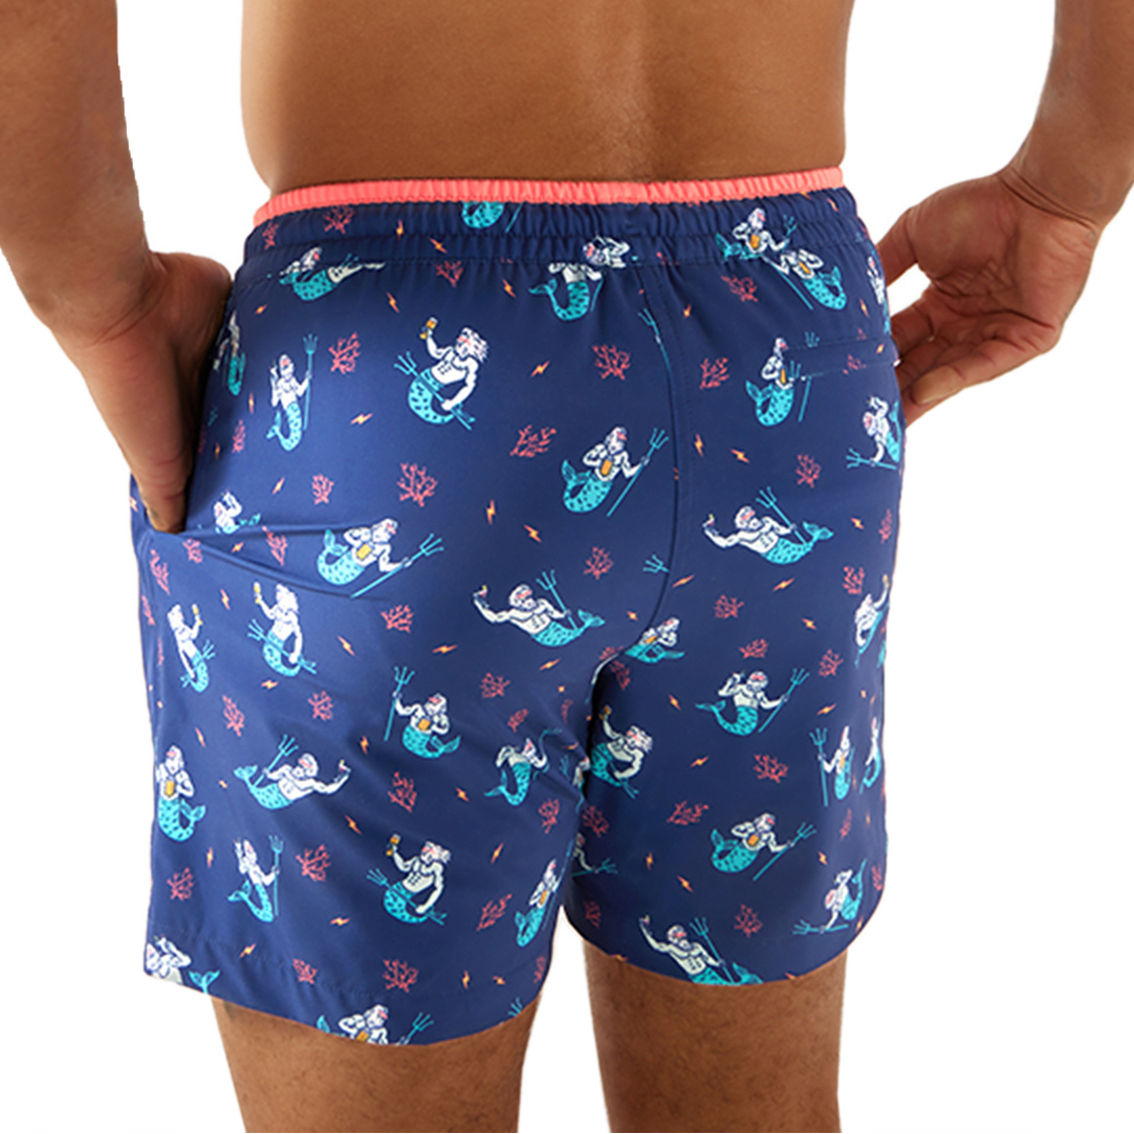 Chubbies The Triton of the Seas 5.5 in. Classic Lined Trunks - Image 2 of 4